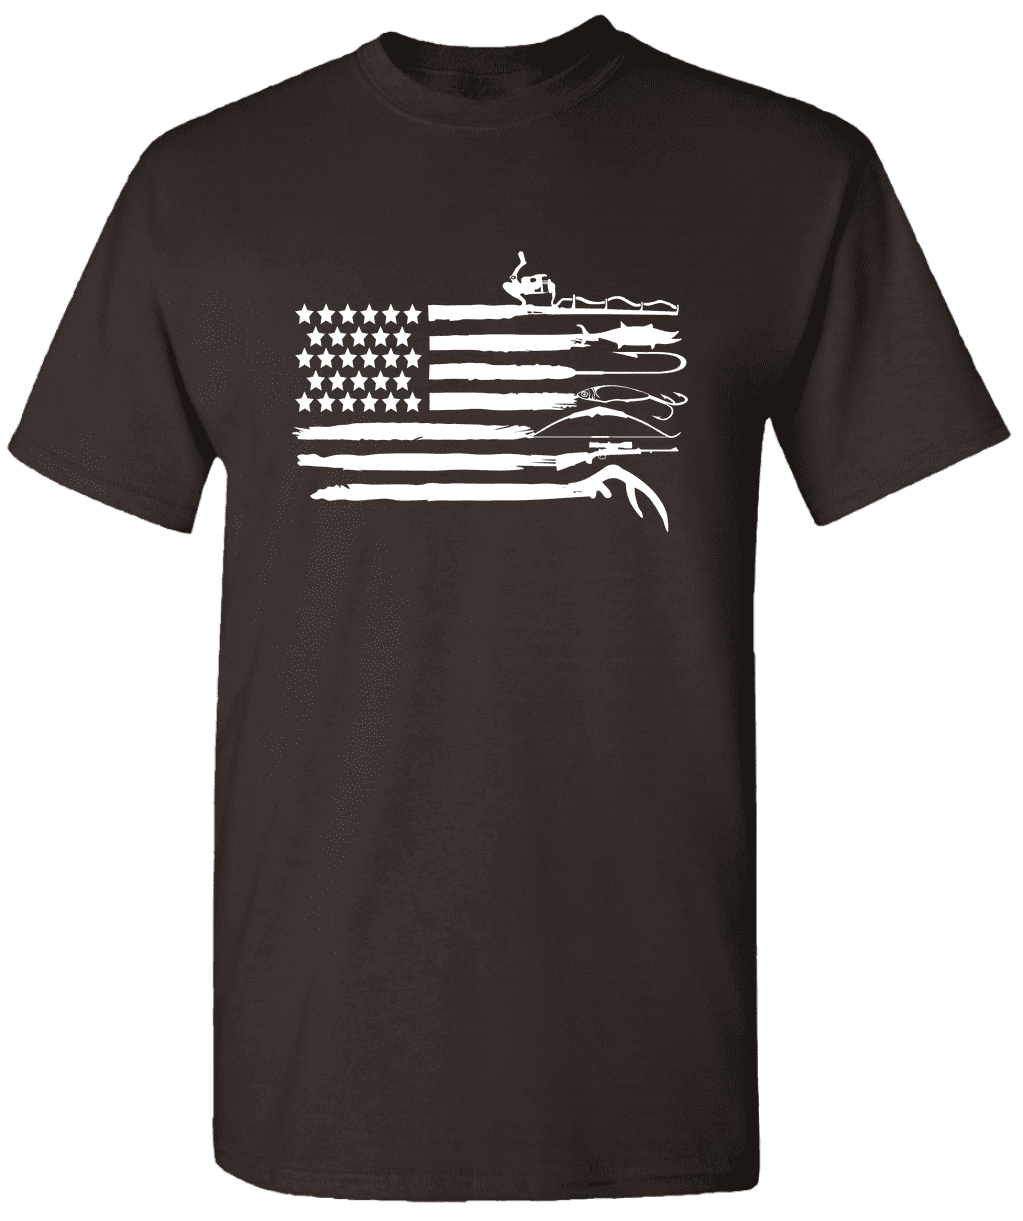 Fishing Pole American Flag Patriotic Outdoorsman T-Shirt by Rone